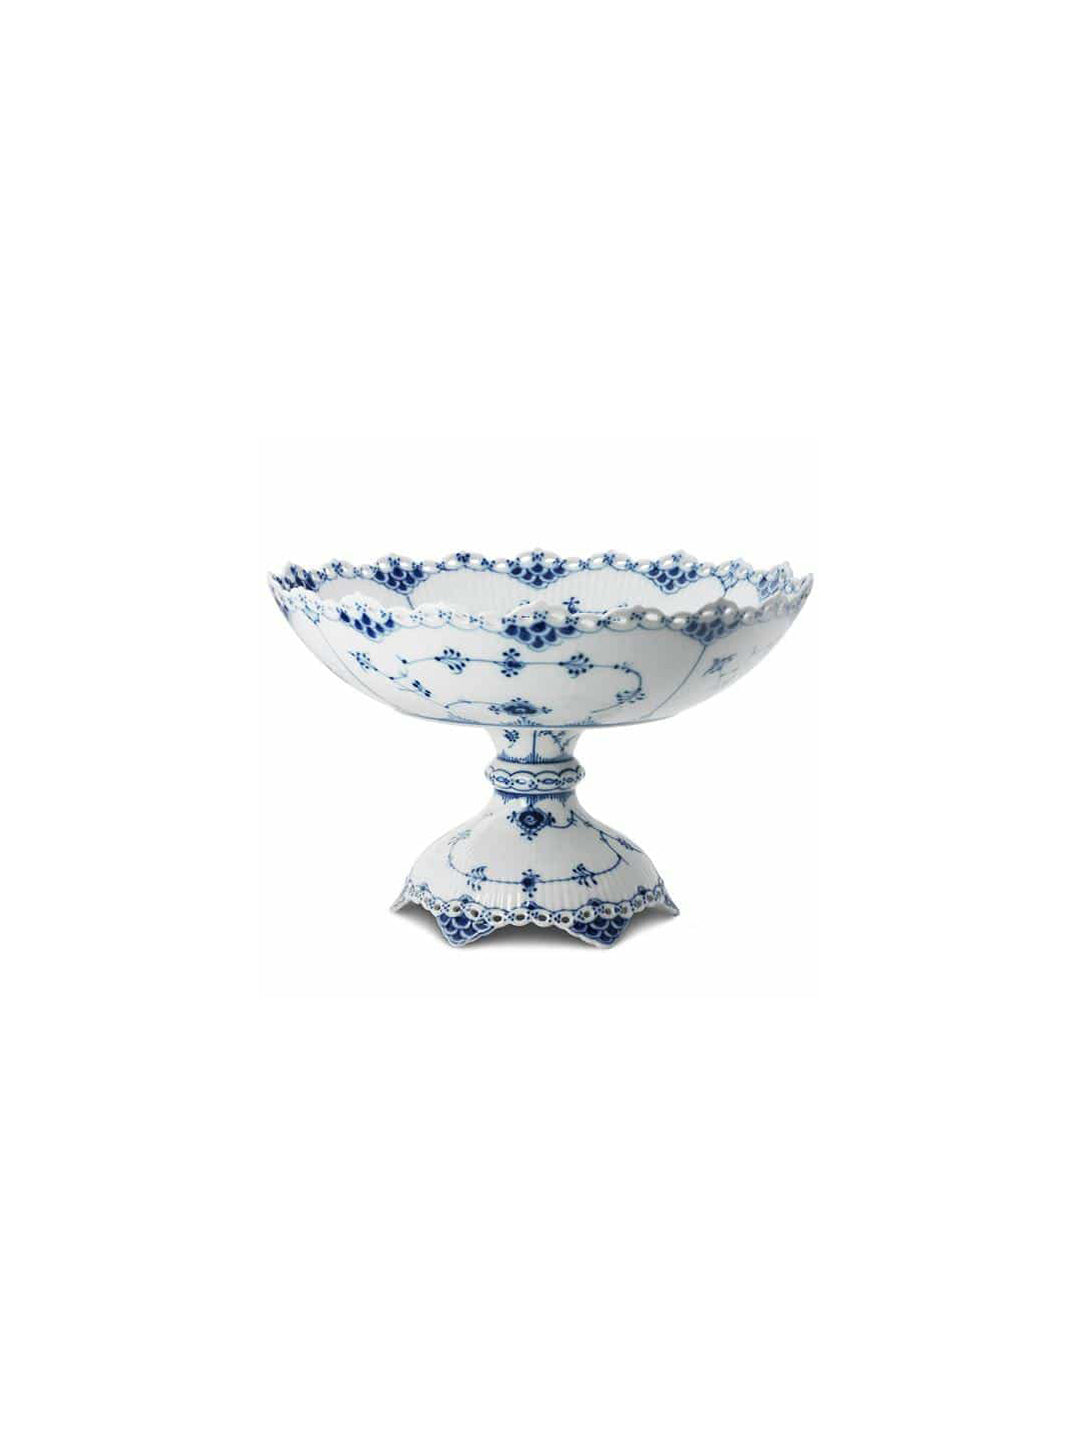 Royal Copenhagen Blue Fluted Full Lace Footed Compote